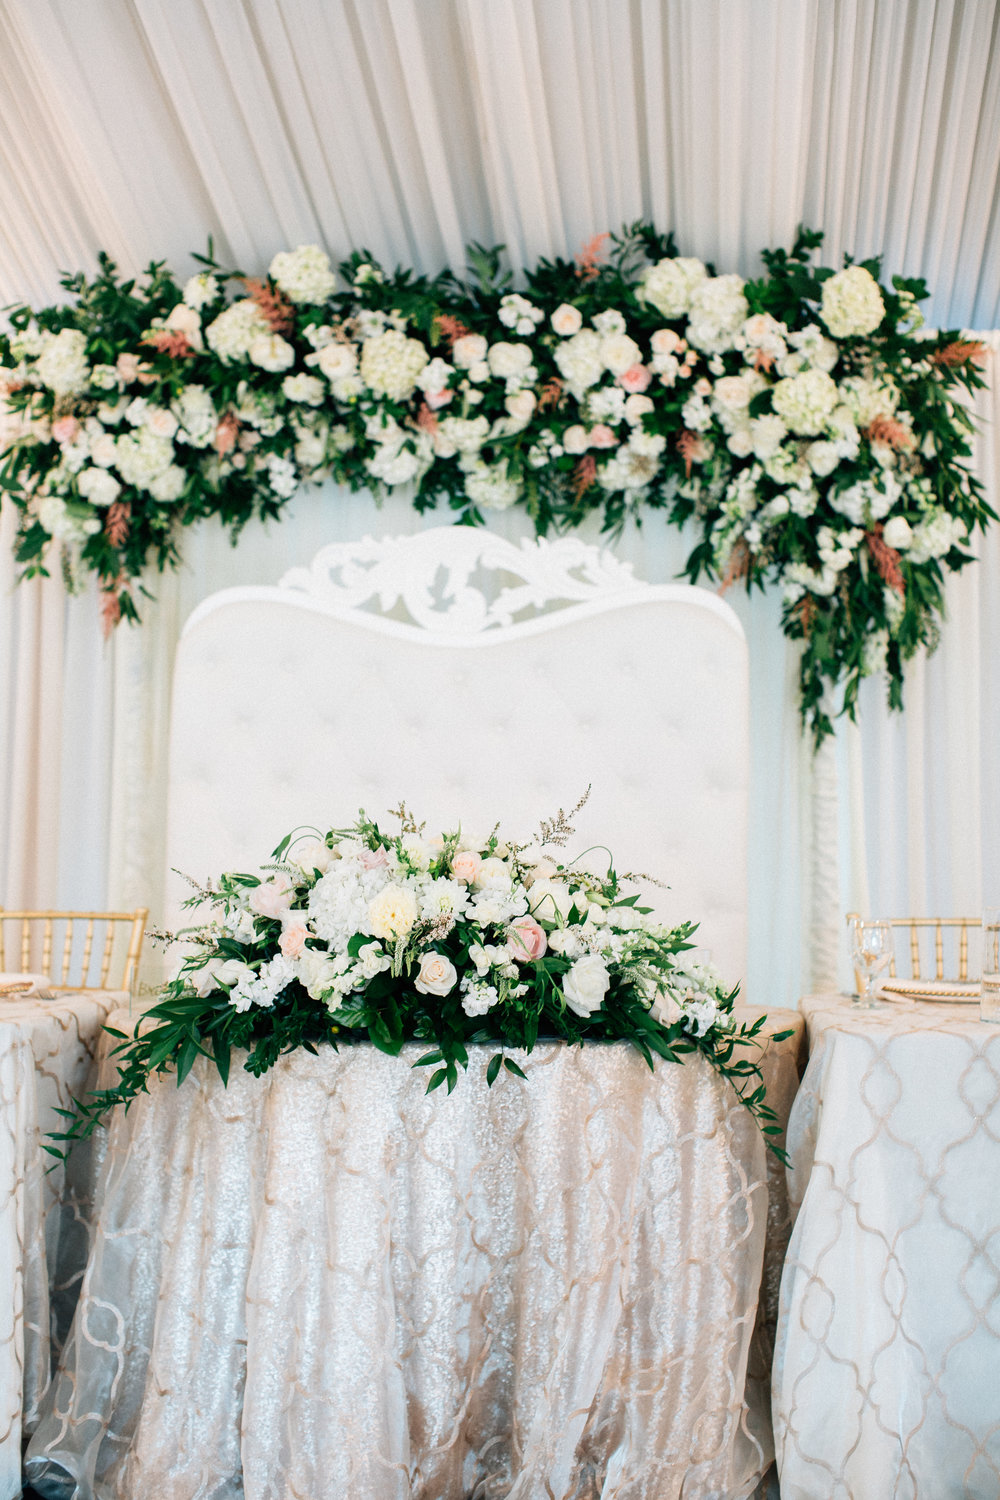 sweetheart_table_lush_gorgeous_flowers_greenery_white_blush_accent_violette_fleurs_anna_perevertaylo.jpg